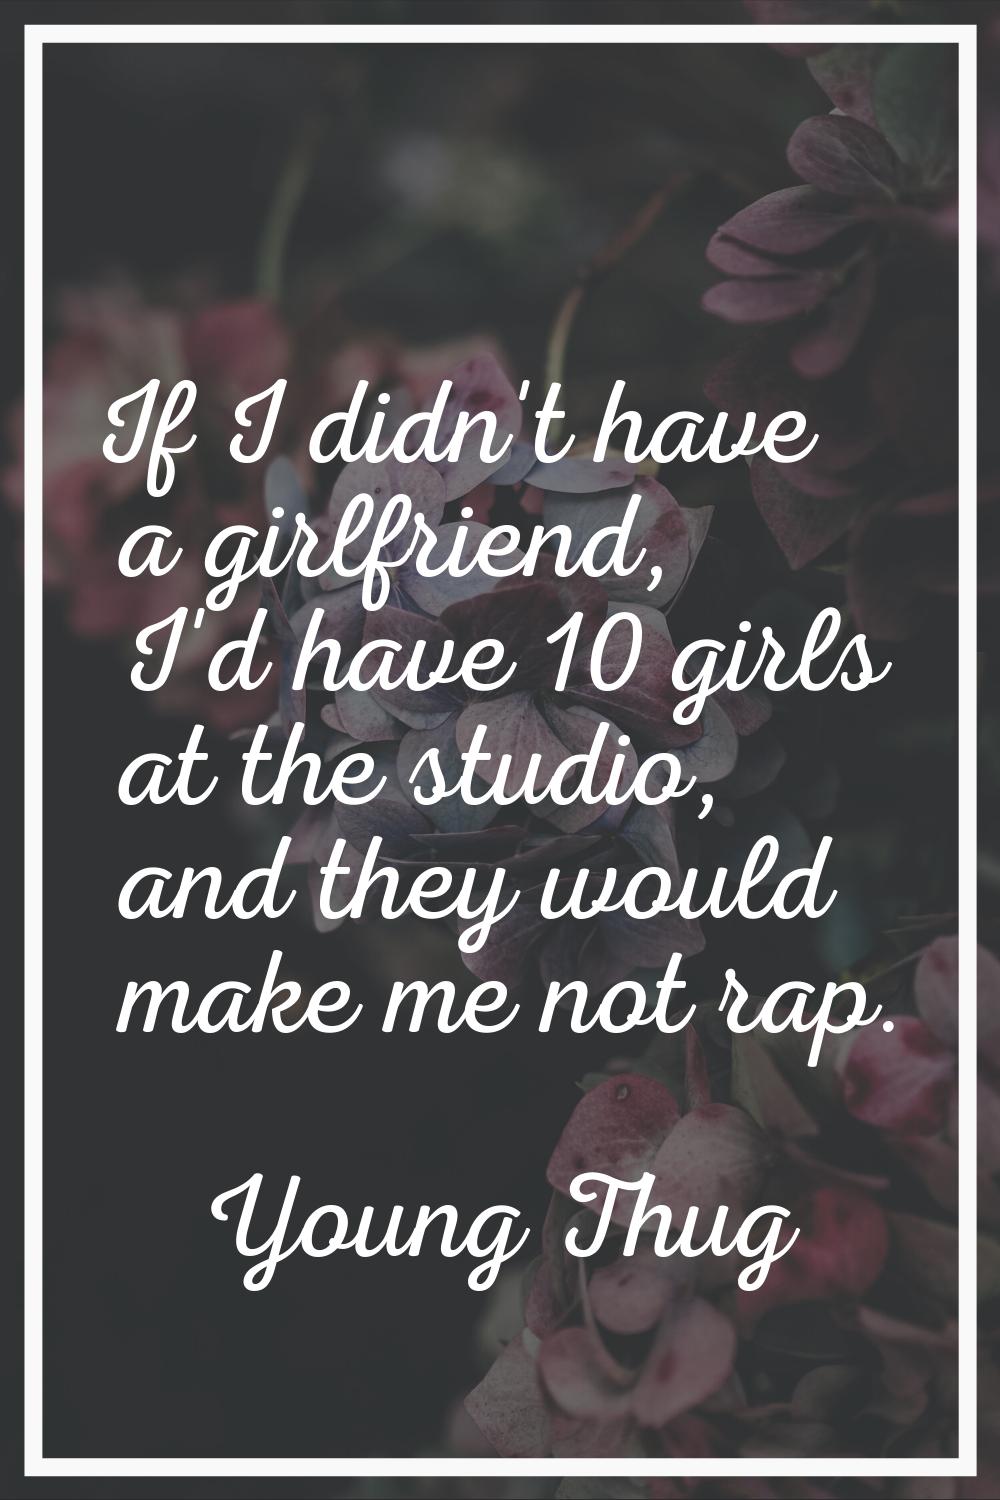 If I didn't have a girlfriend, I'd have 10 girls at the studio, and they would make me not rap.